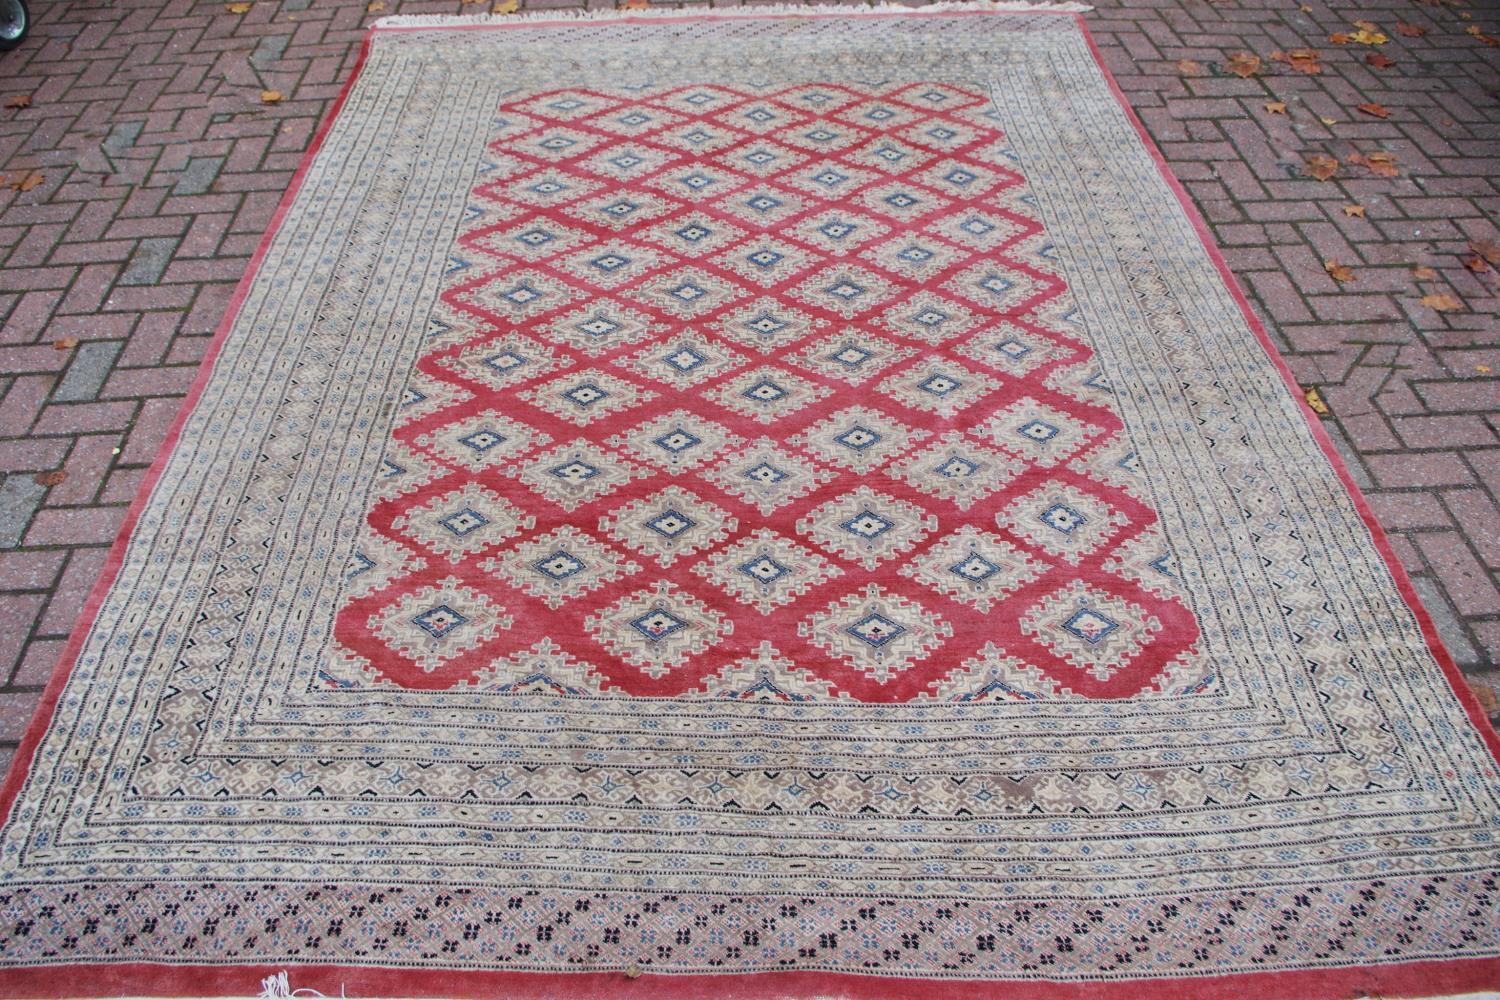 Rug - a hand woven rug decorated with geometric designs in tones of cafe-au-lait, grey and cream